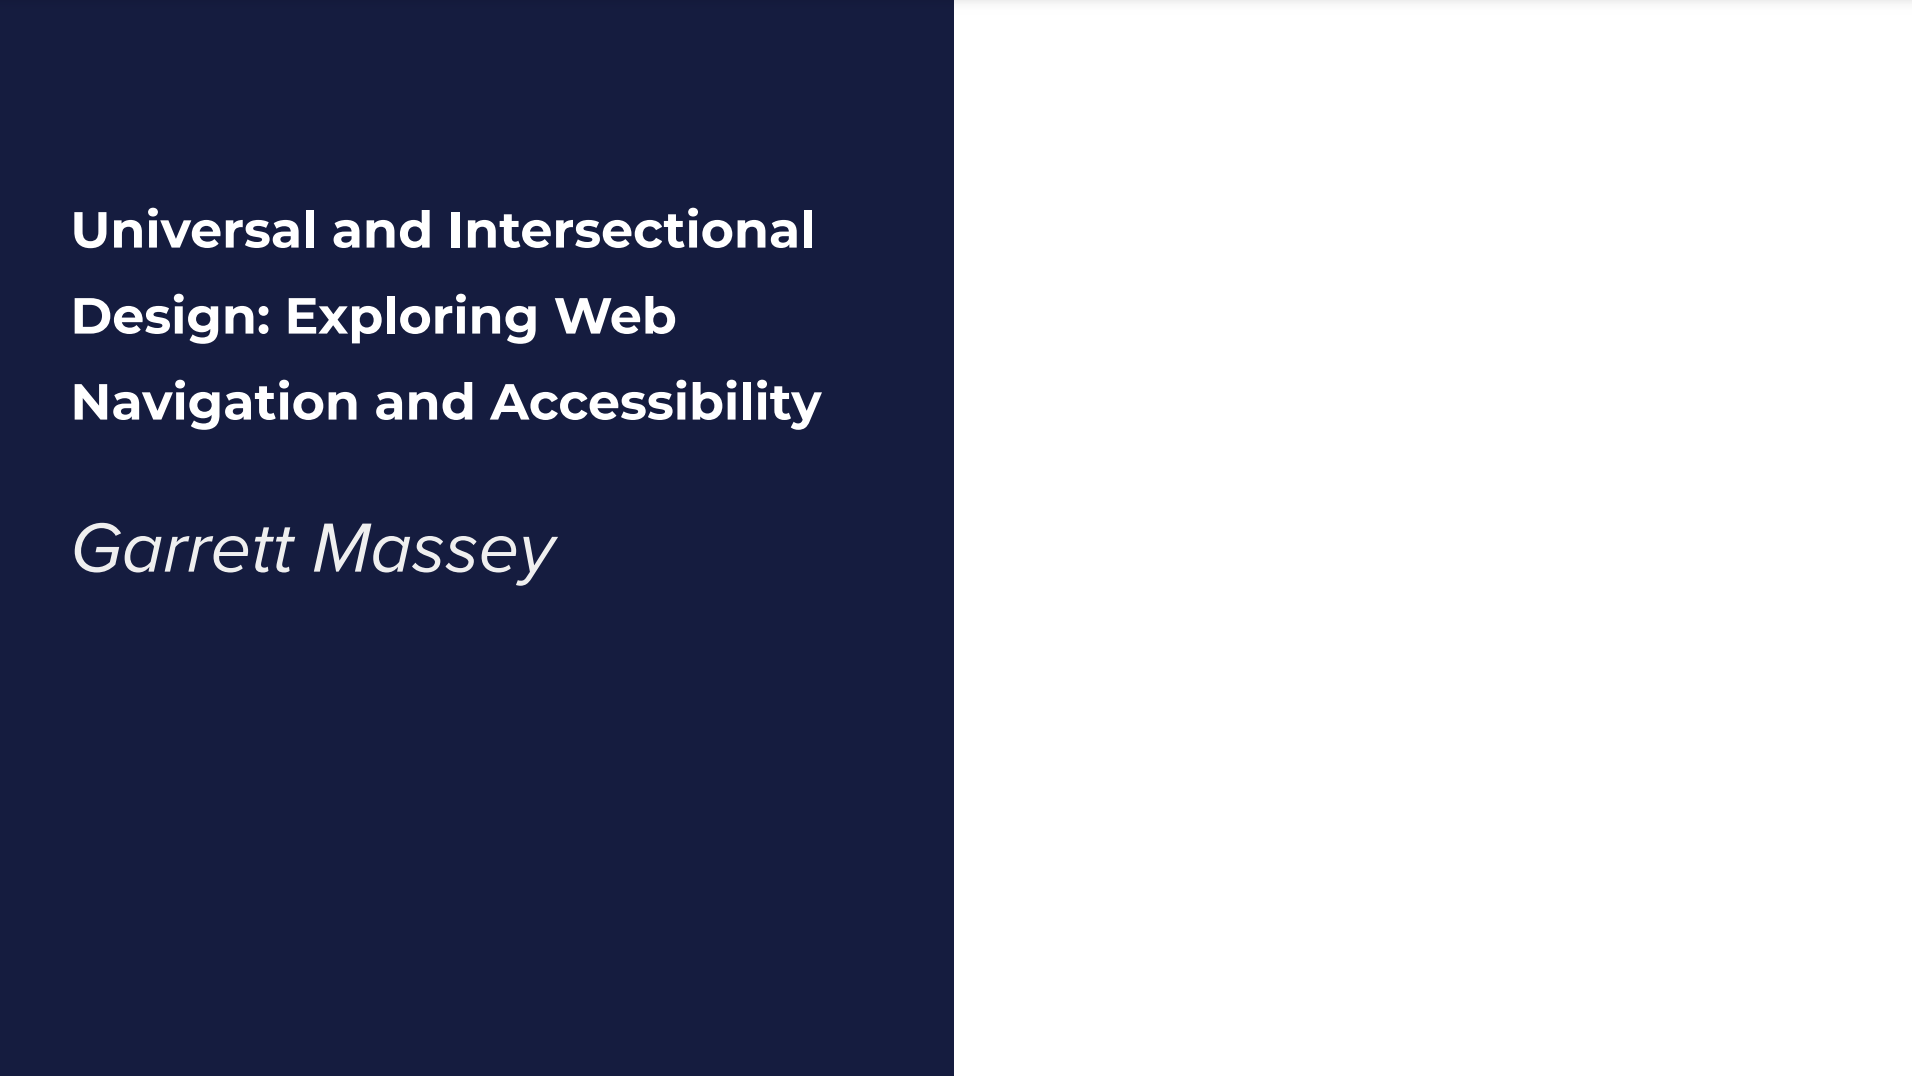 Screenshot of STC Presentation Title Slide reading "Universal and Intersectional Design: Exploring Web Navigation and Accessibility by Garrett Massey"